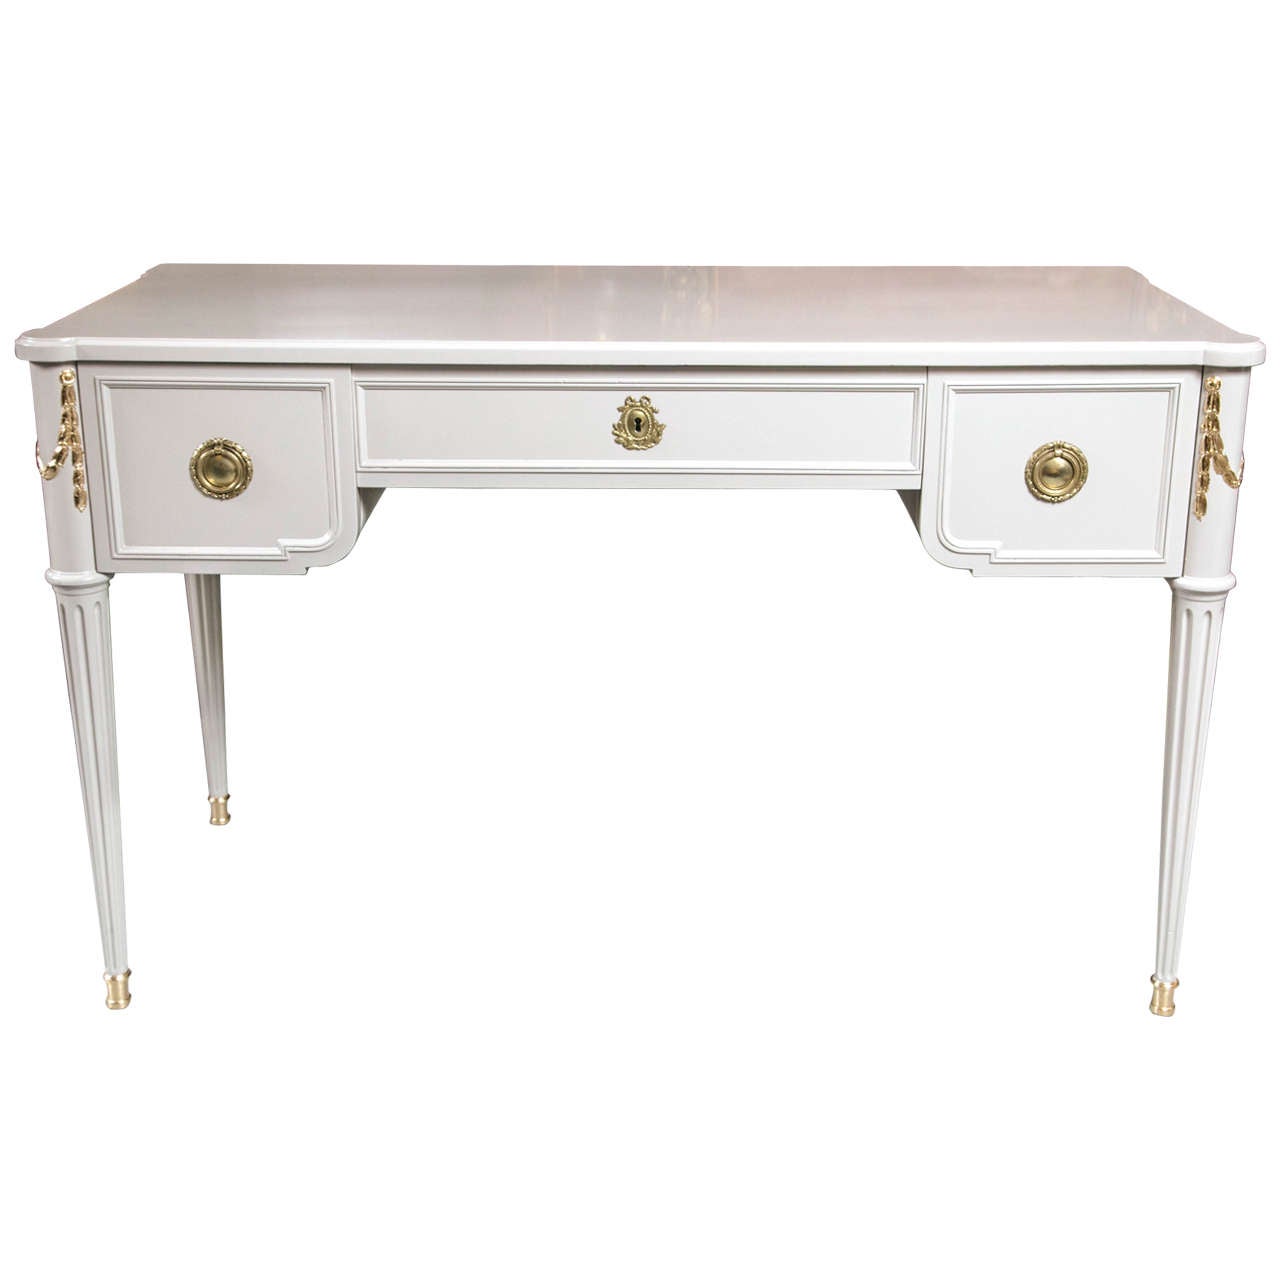 Paint Decorated and Gilt Gold Louis XVI Style Vanity Desk by John Widdicomb